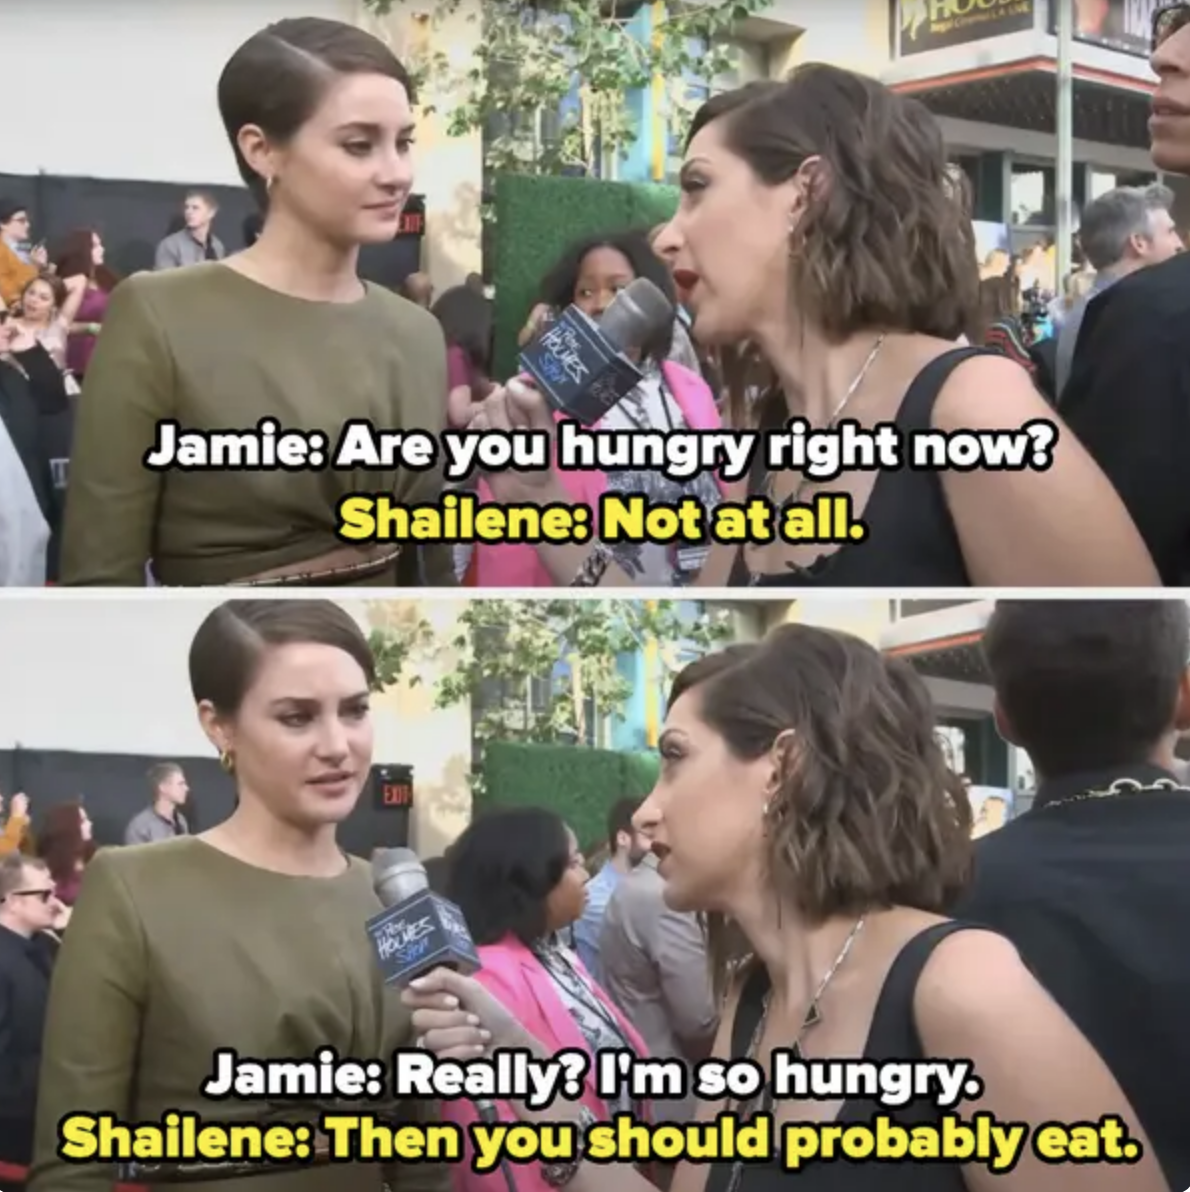 the interviewer insists Shailene must be hungry like she is, the actor says, &quot;you should probably eat&quot;